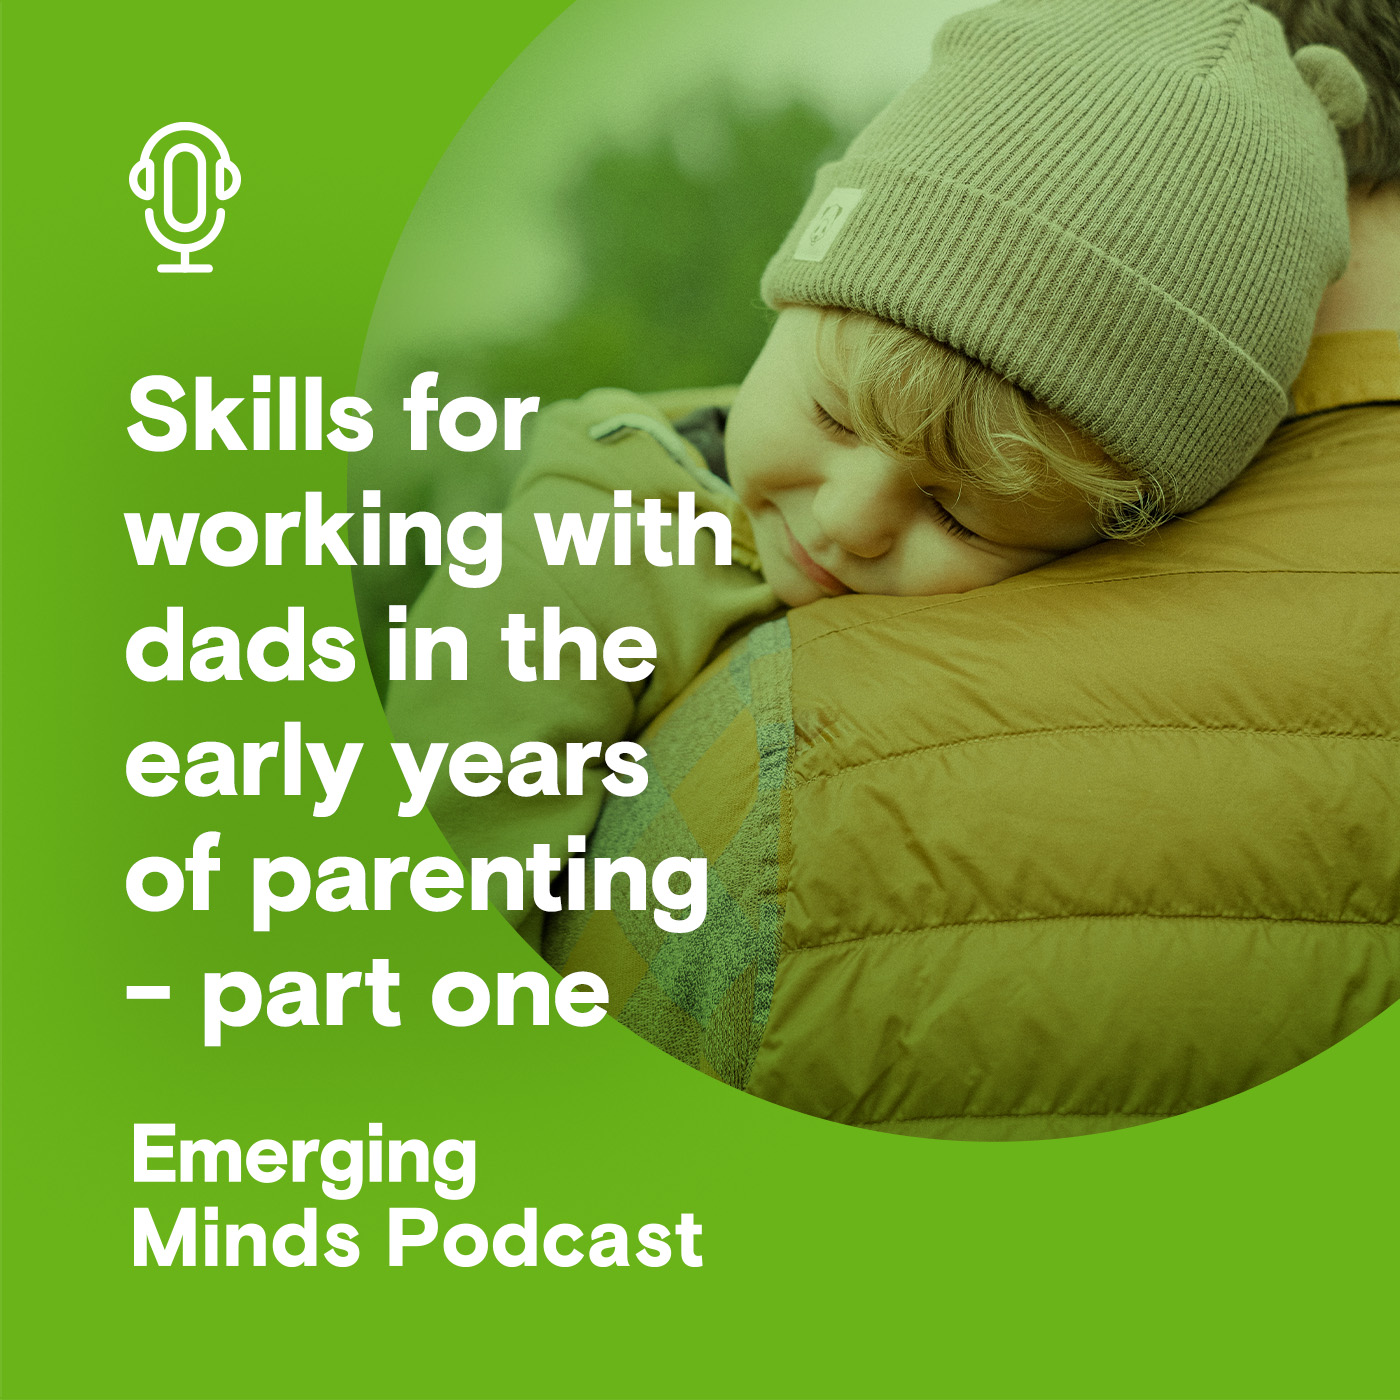 Skills for working with dads in the early years of parenting - part one